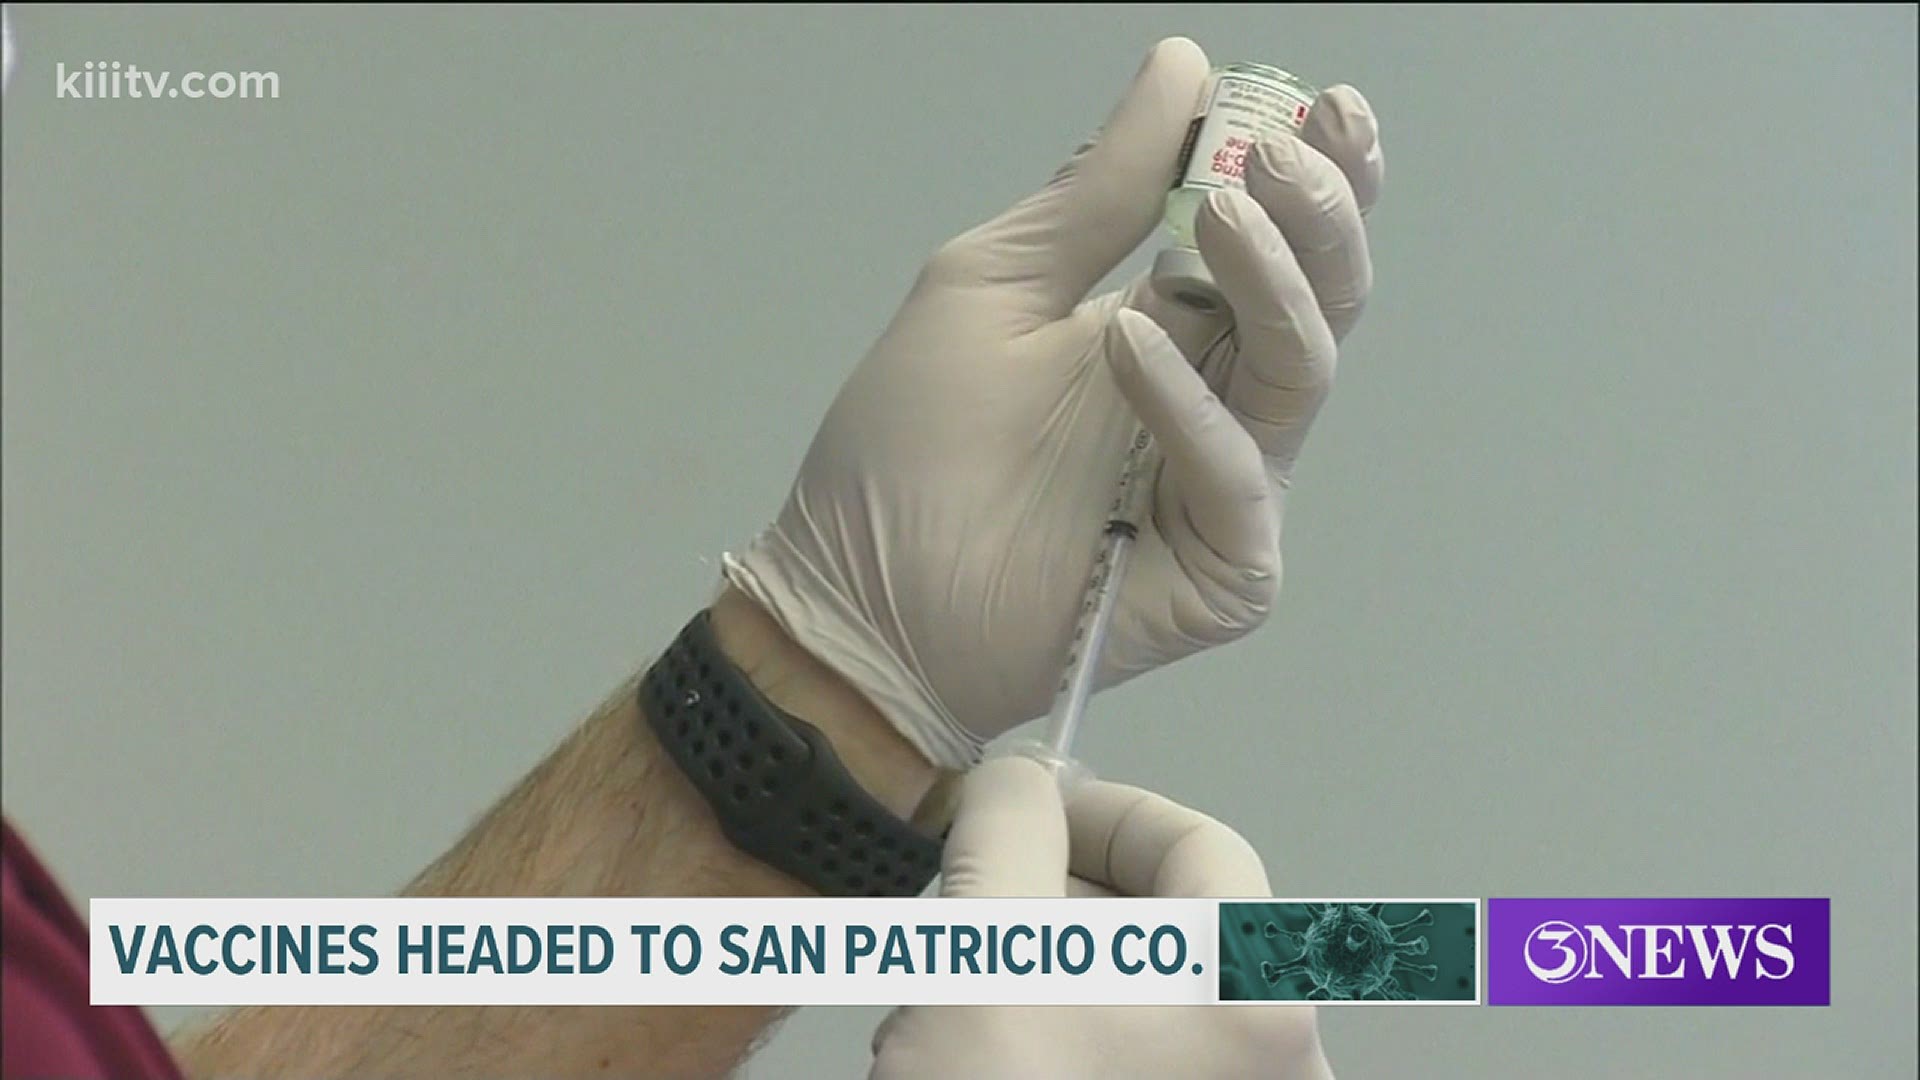 San Patricio County Health Department officials are still waiting on their first shipment of the COVID-19 vaccine, but they said it is on the way.